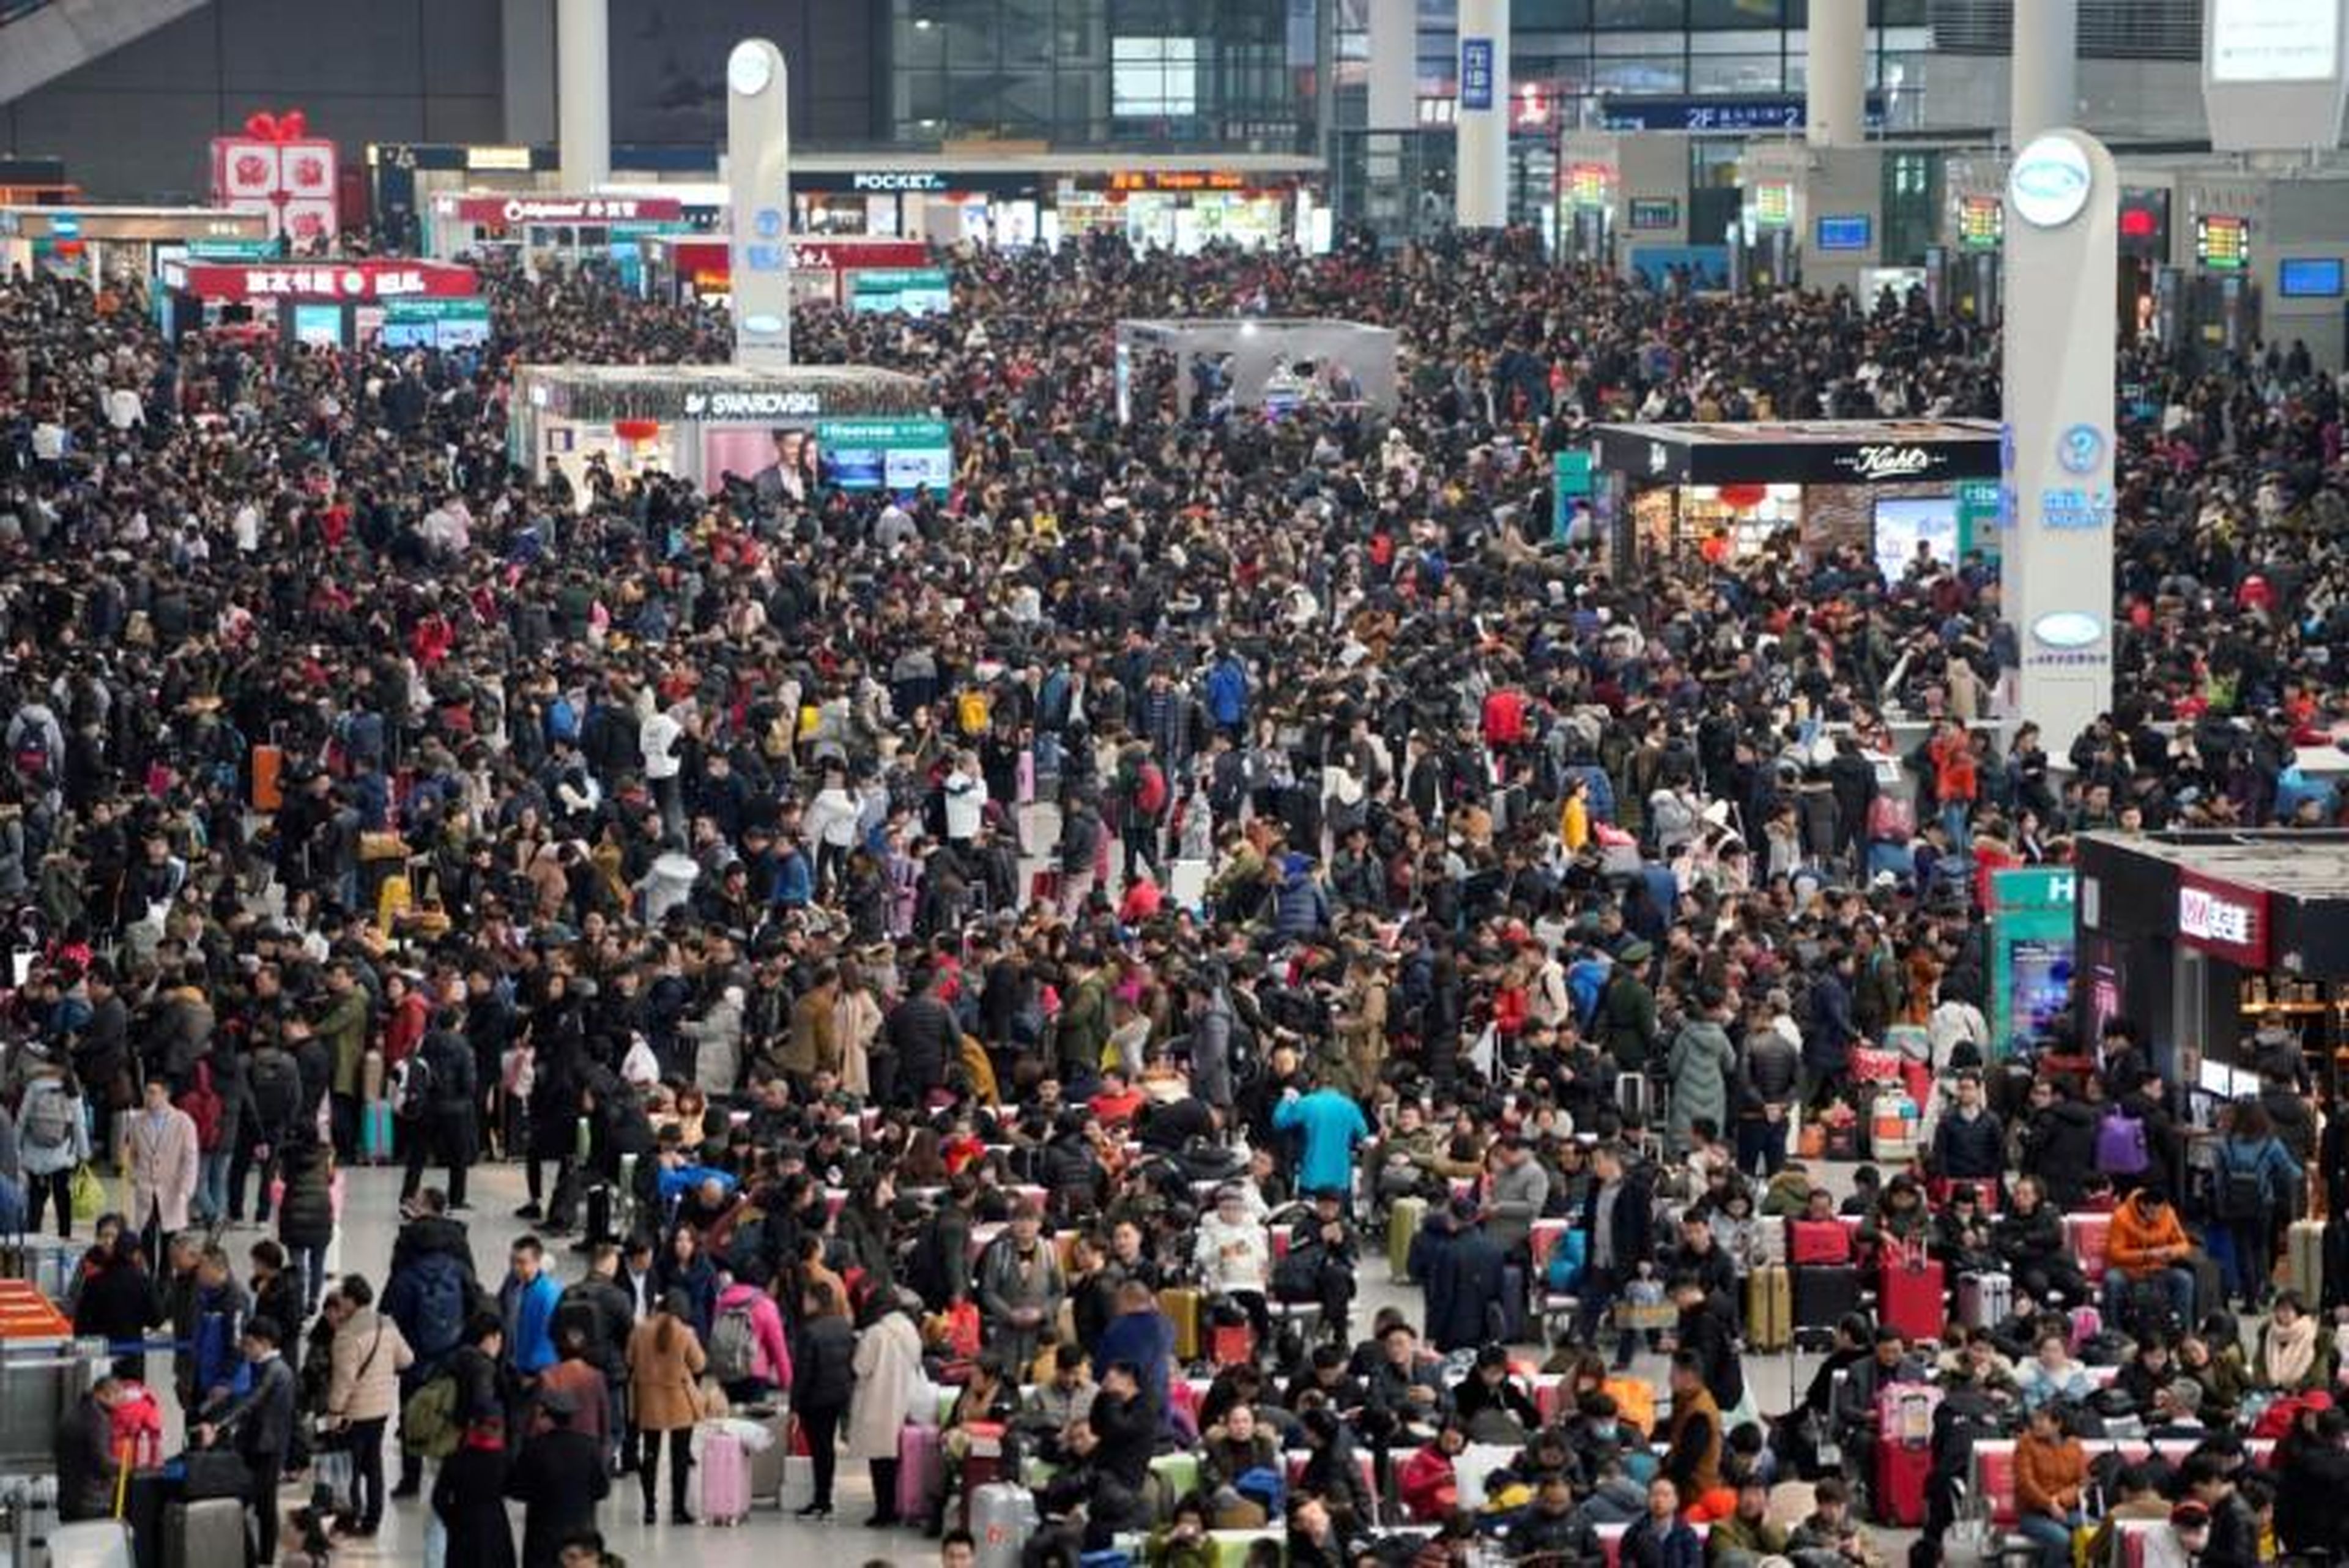 Passengers waiting to board trains at Shanghai's Hongqiao Railway Station ahead of the Lunar New Year in February 2018.